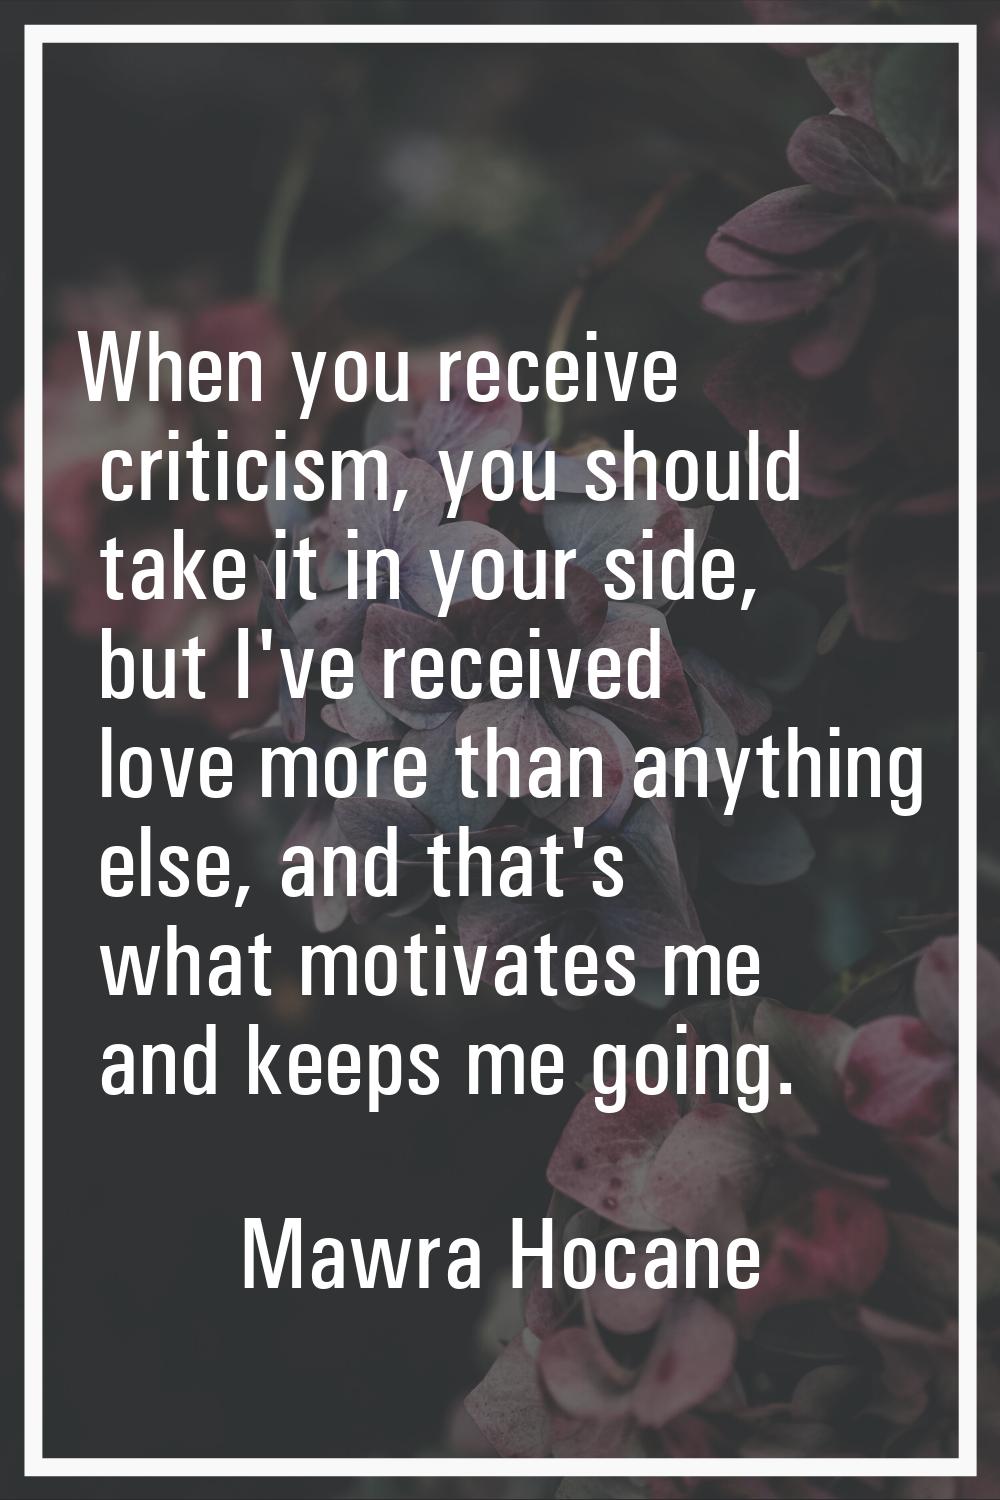 When you receive criticism, you should take it in your side, but I've received love more than anyth